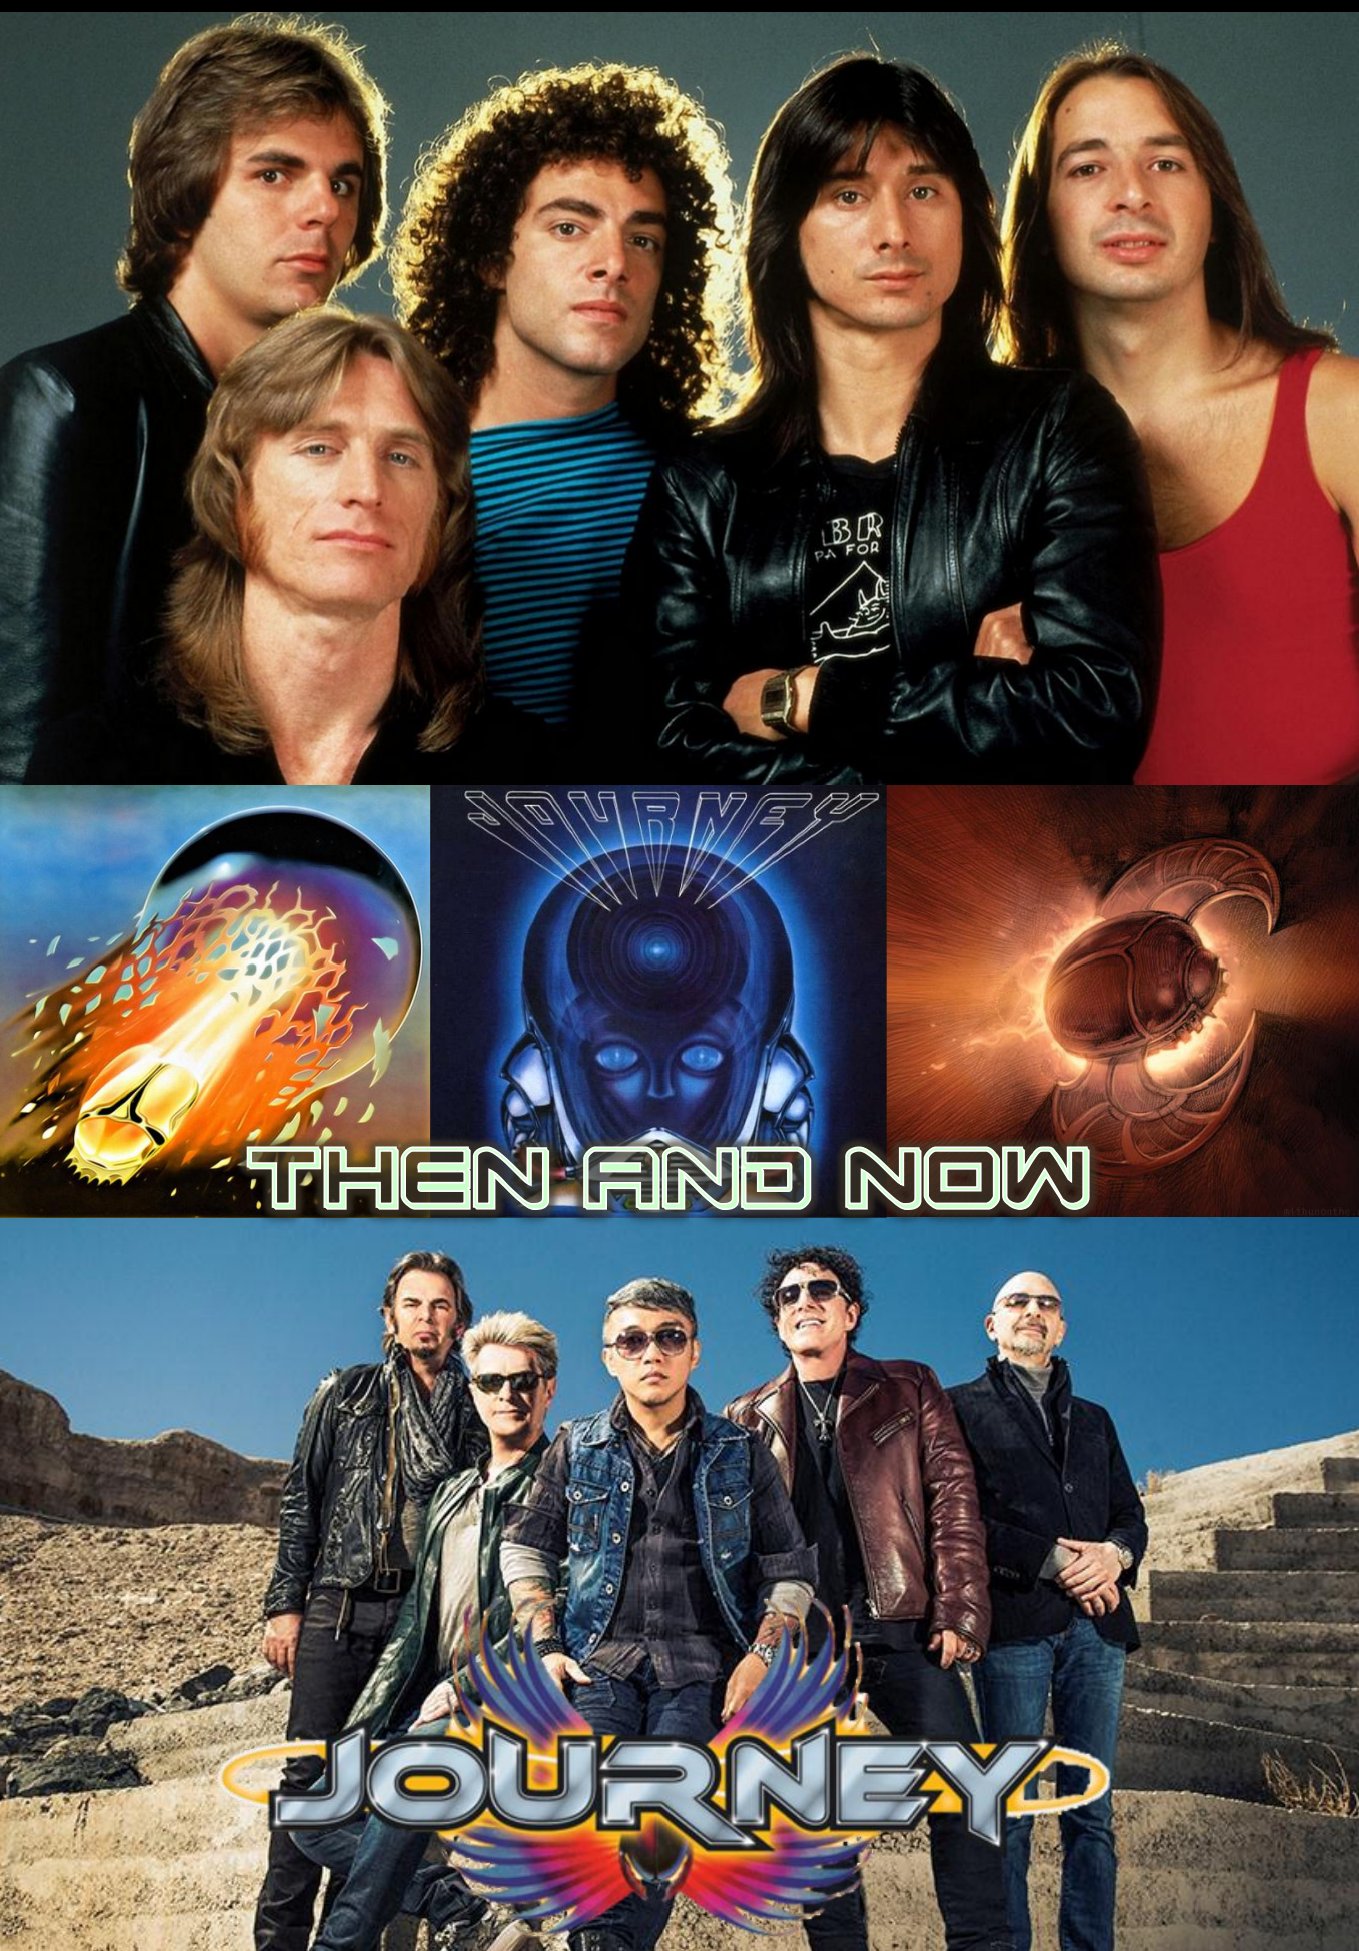 maler dragt Orkan Journey Fan's Escape on Twitter: "Still the Greatest band  #AfterAllTheseYears Thank you @NealSchonMusic @TheJonathanCain @arnelpineda  @RossValory @stevesmithdrums #Faithfully https://t.co/5P5l8F7DLC" / Twitter